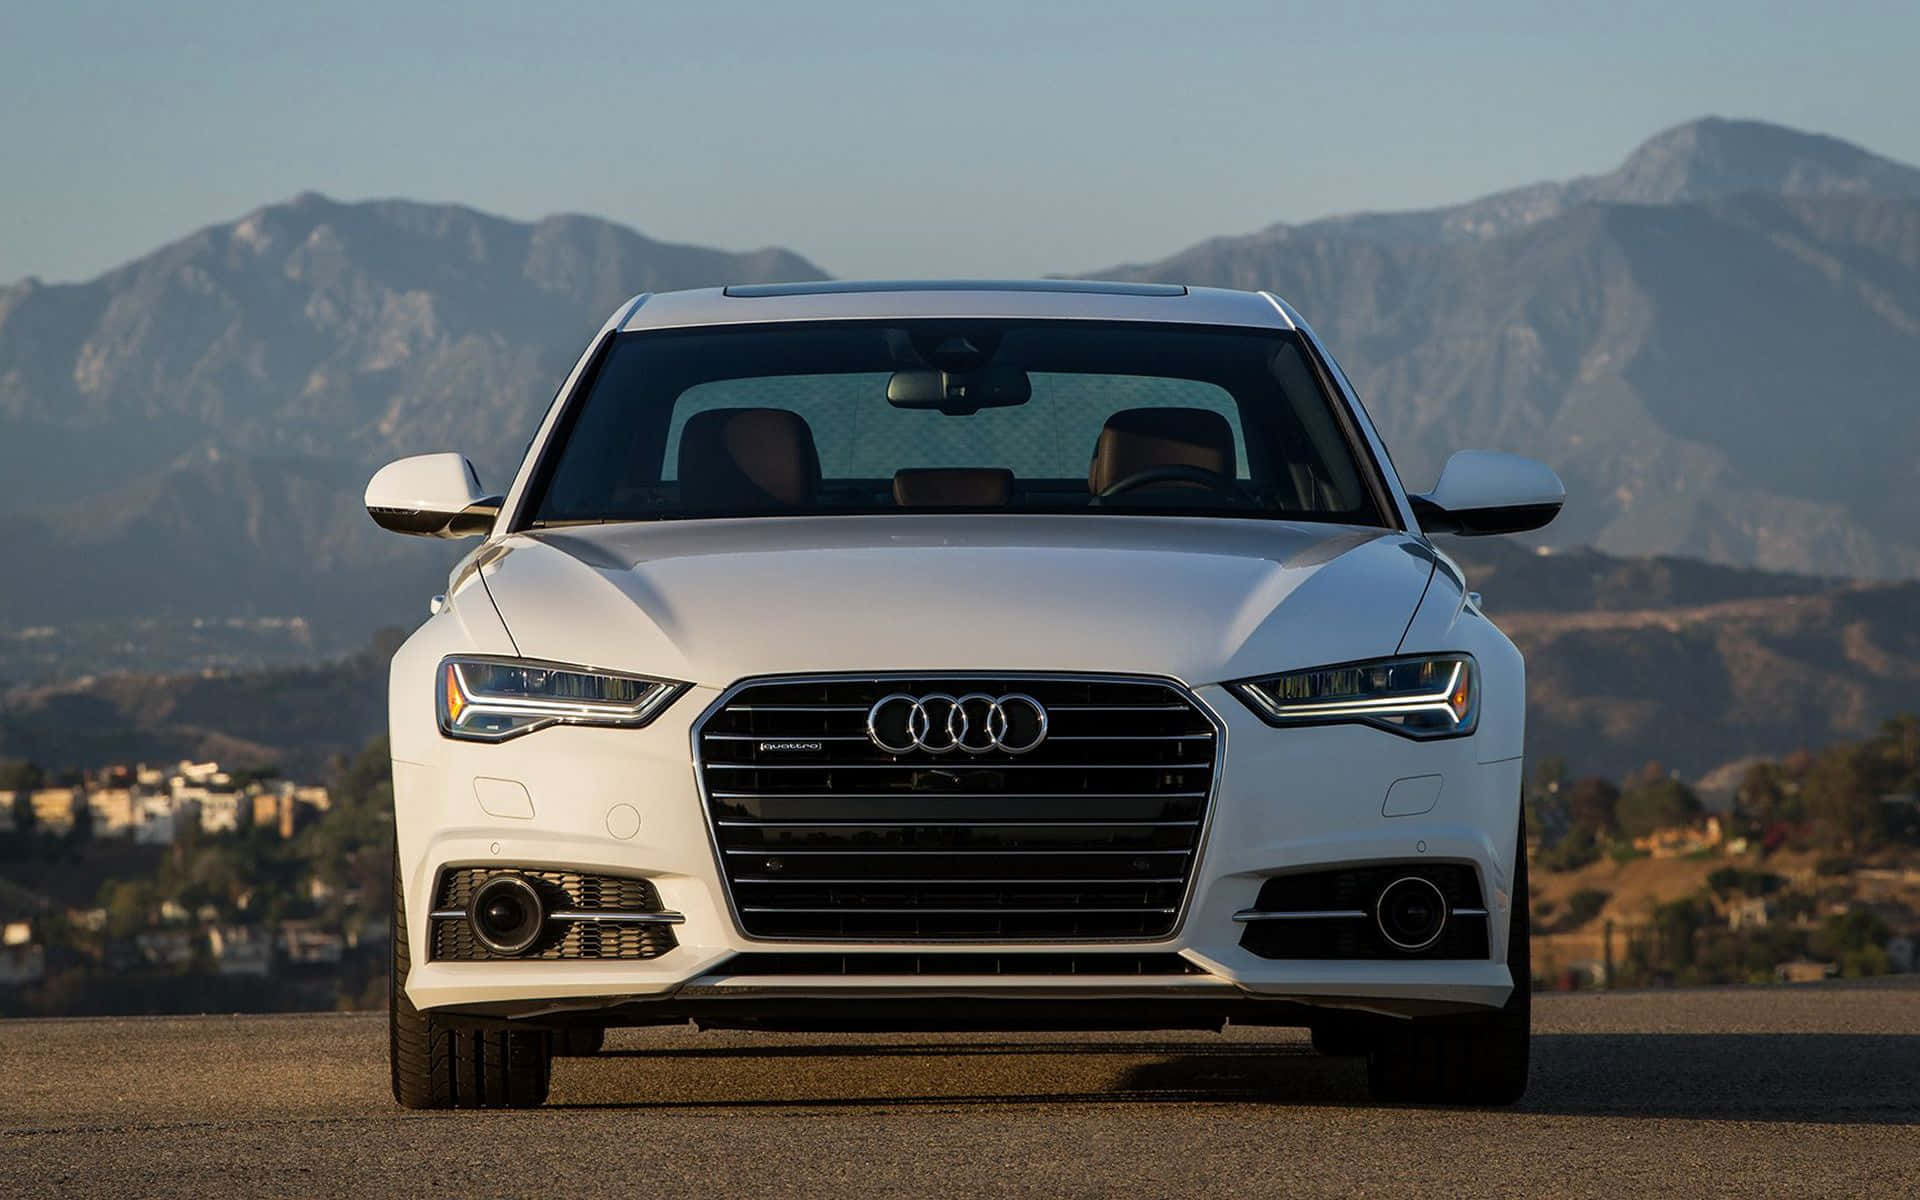 Stunning Audi A6 in motion on open road Wallpaper